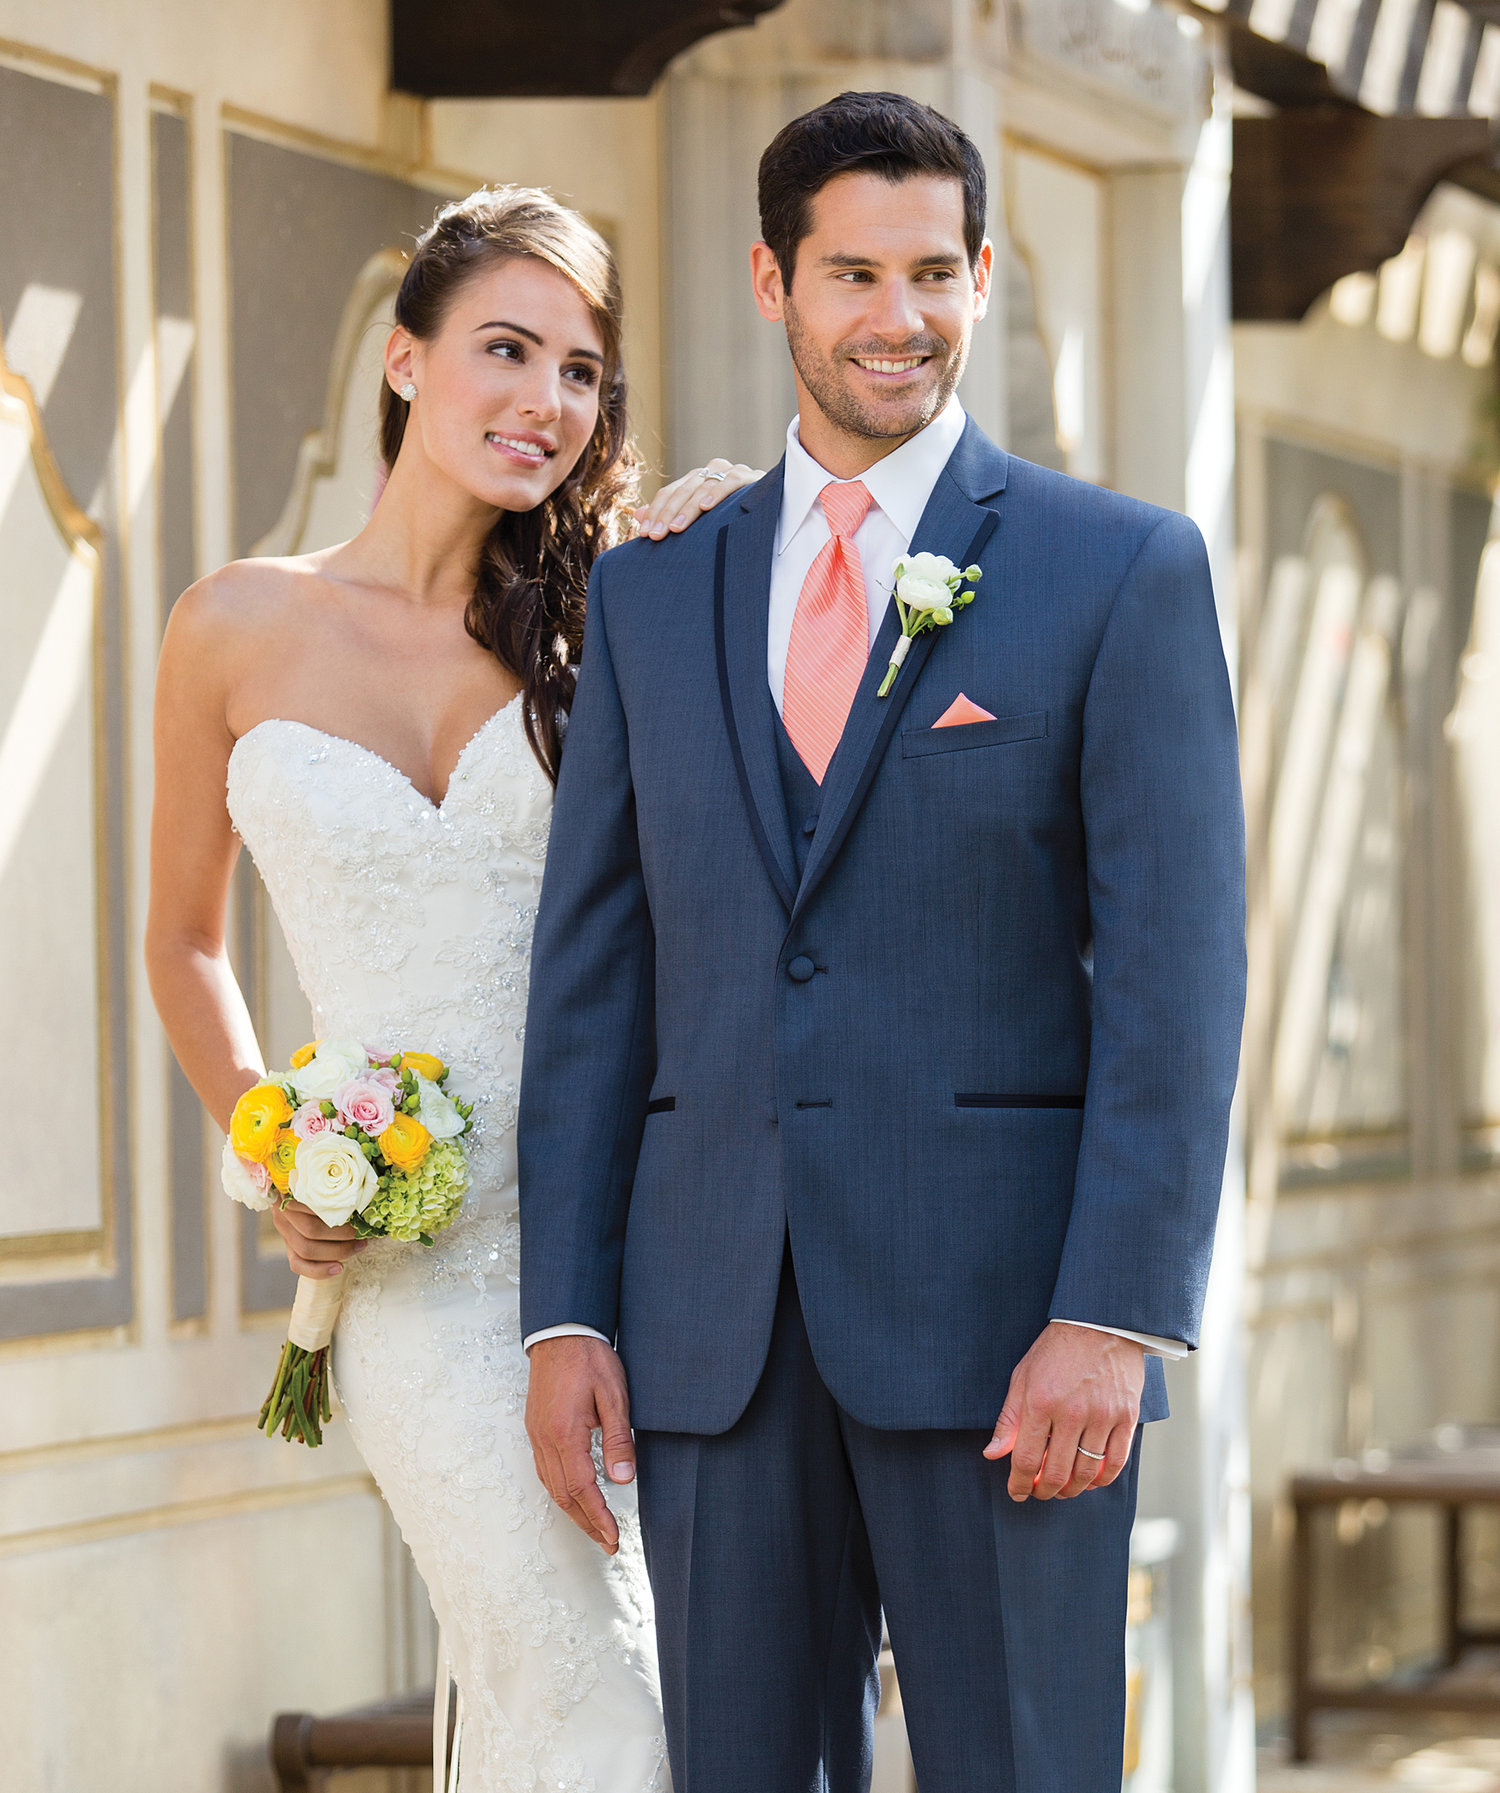 Men's Tuxedos, Prom, Suits, and Formal Wear — Charme Bridal & Prom 